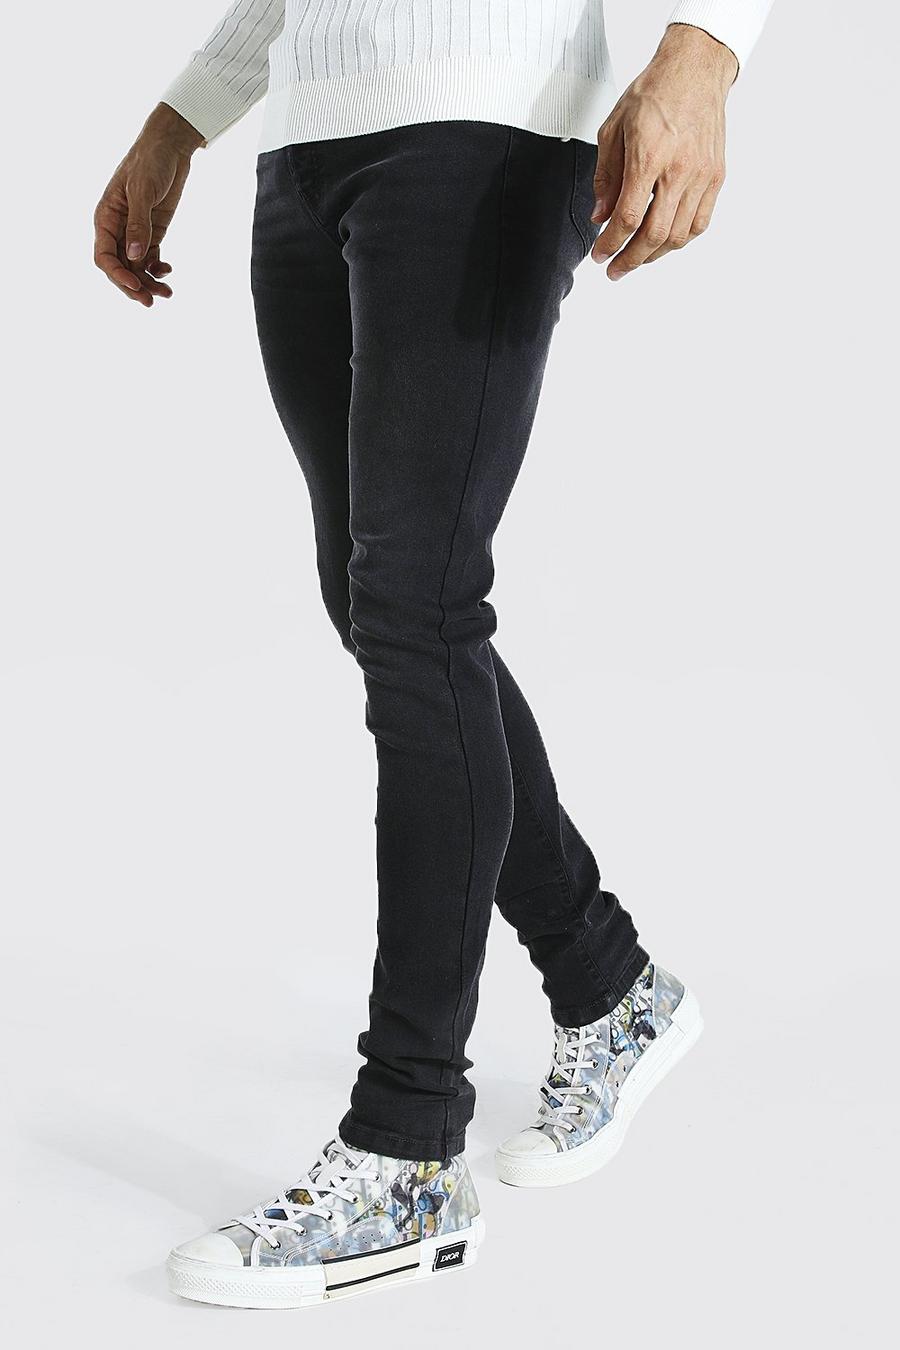 Tall Skinny Jeans, Charcoal gris